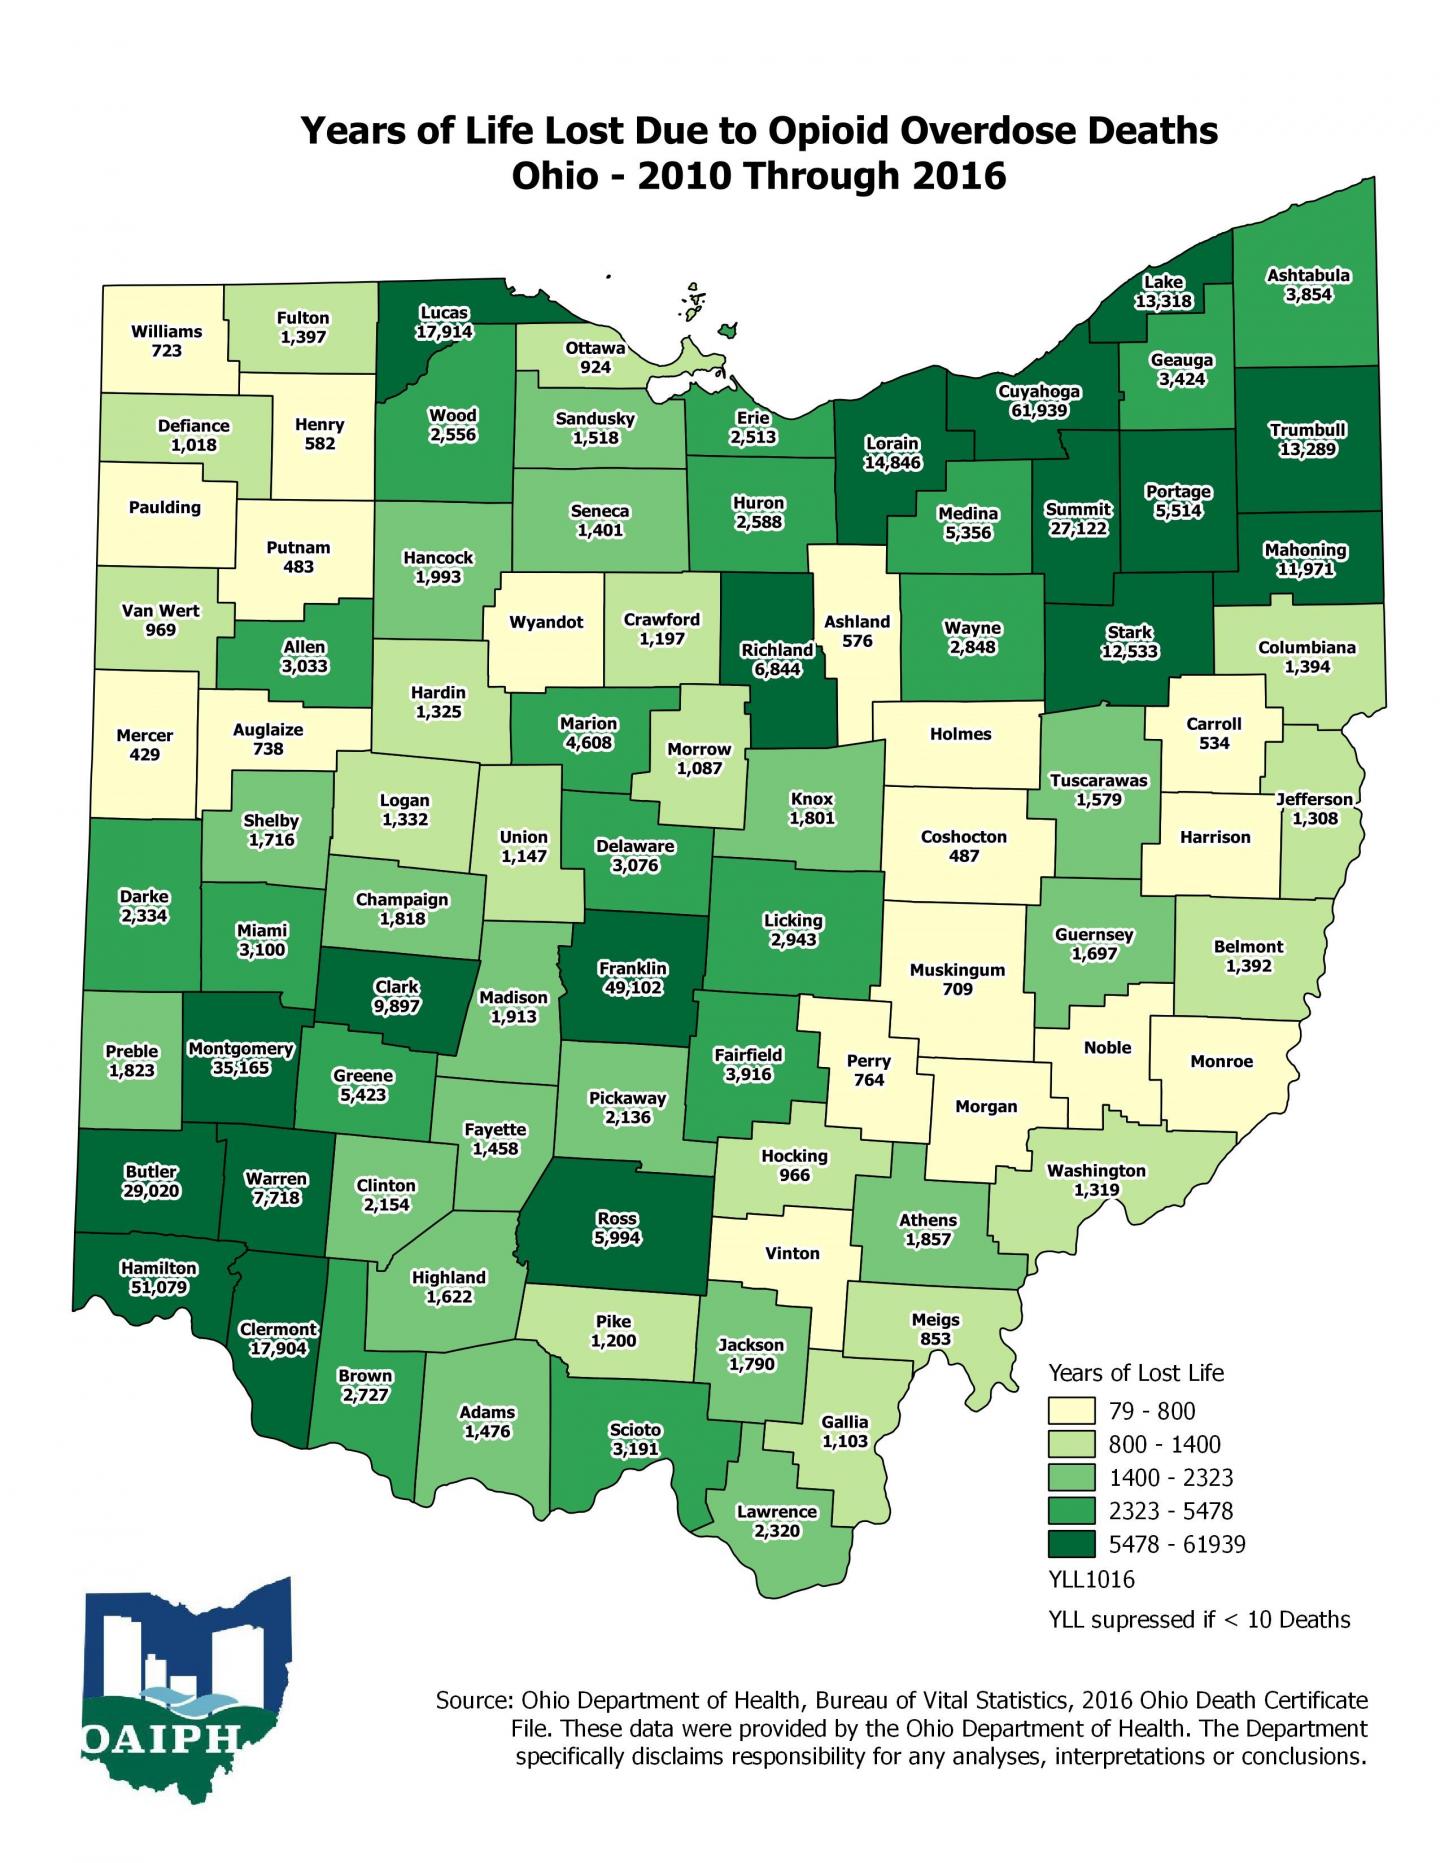 Years of Life Lost to Opioid Overdose Deaths in Ohio